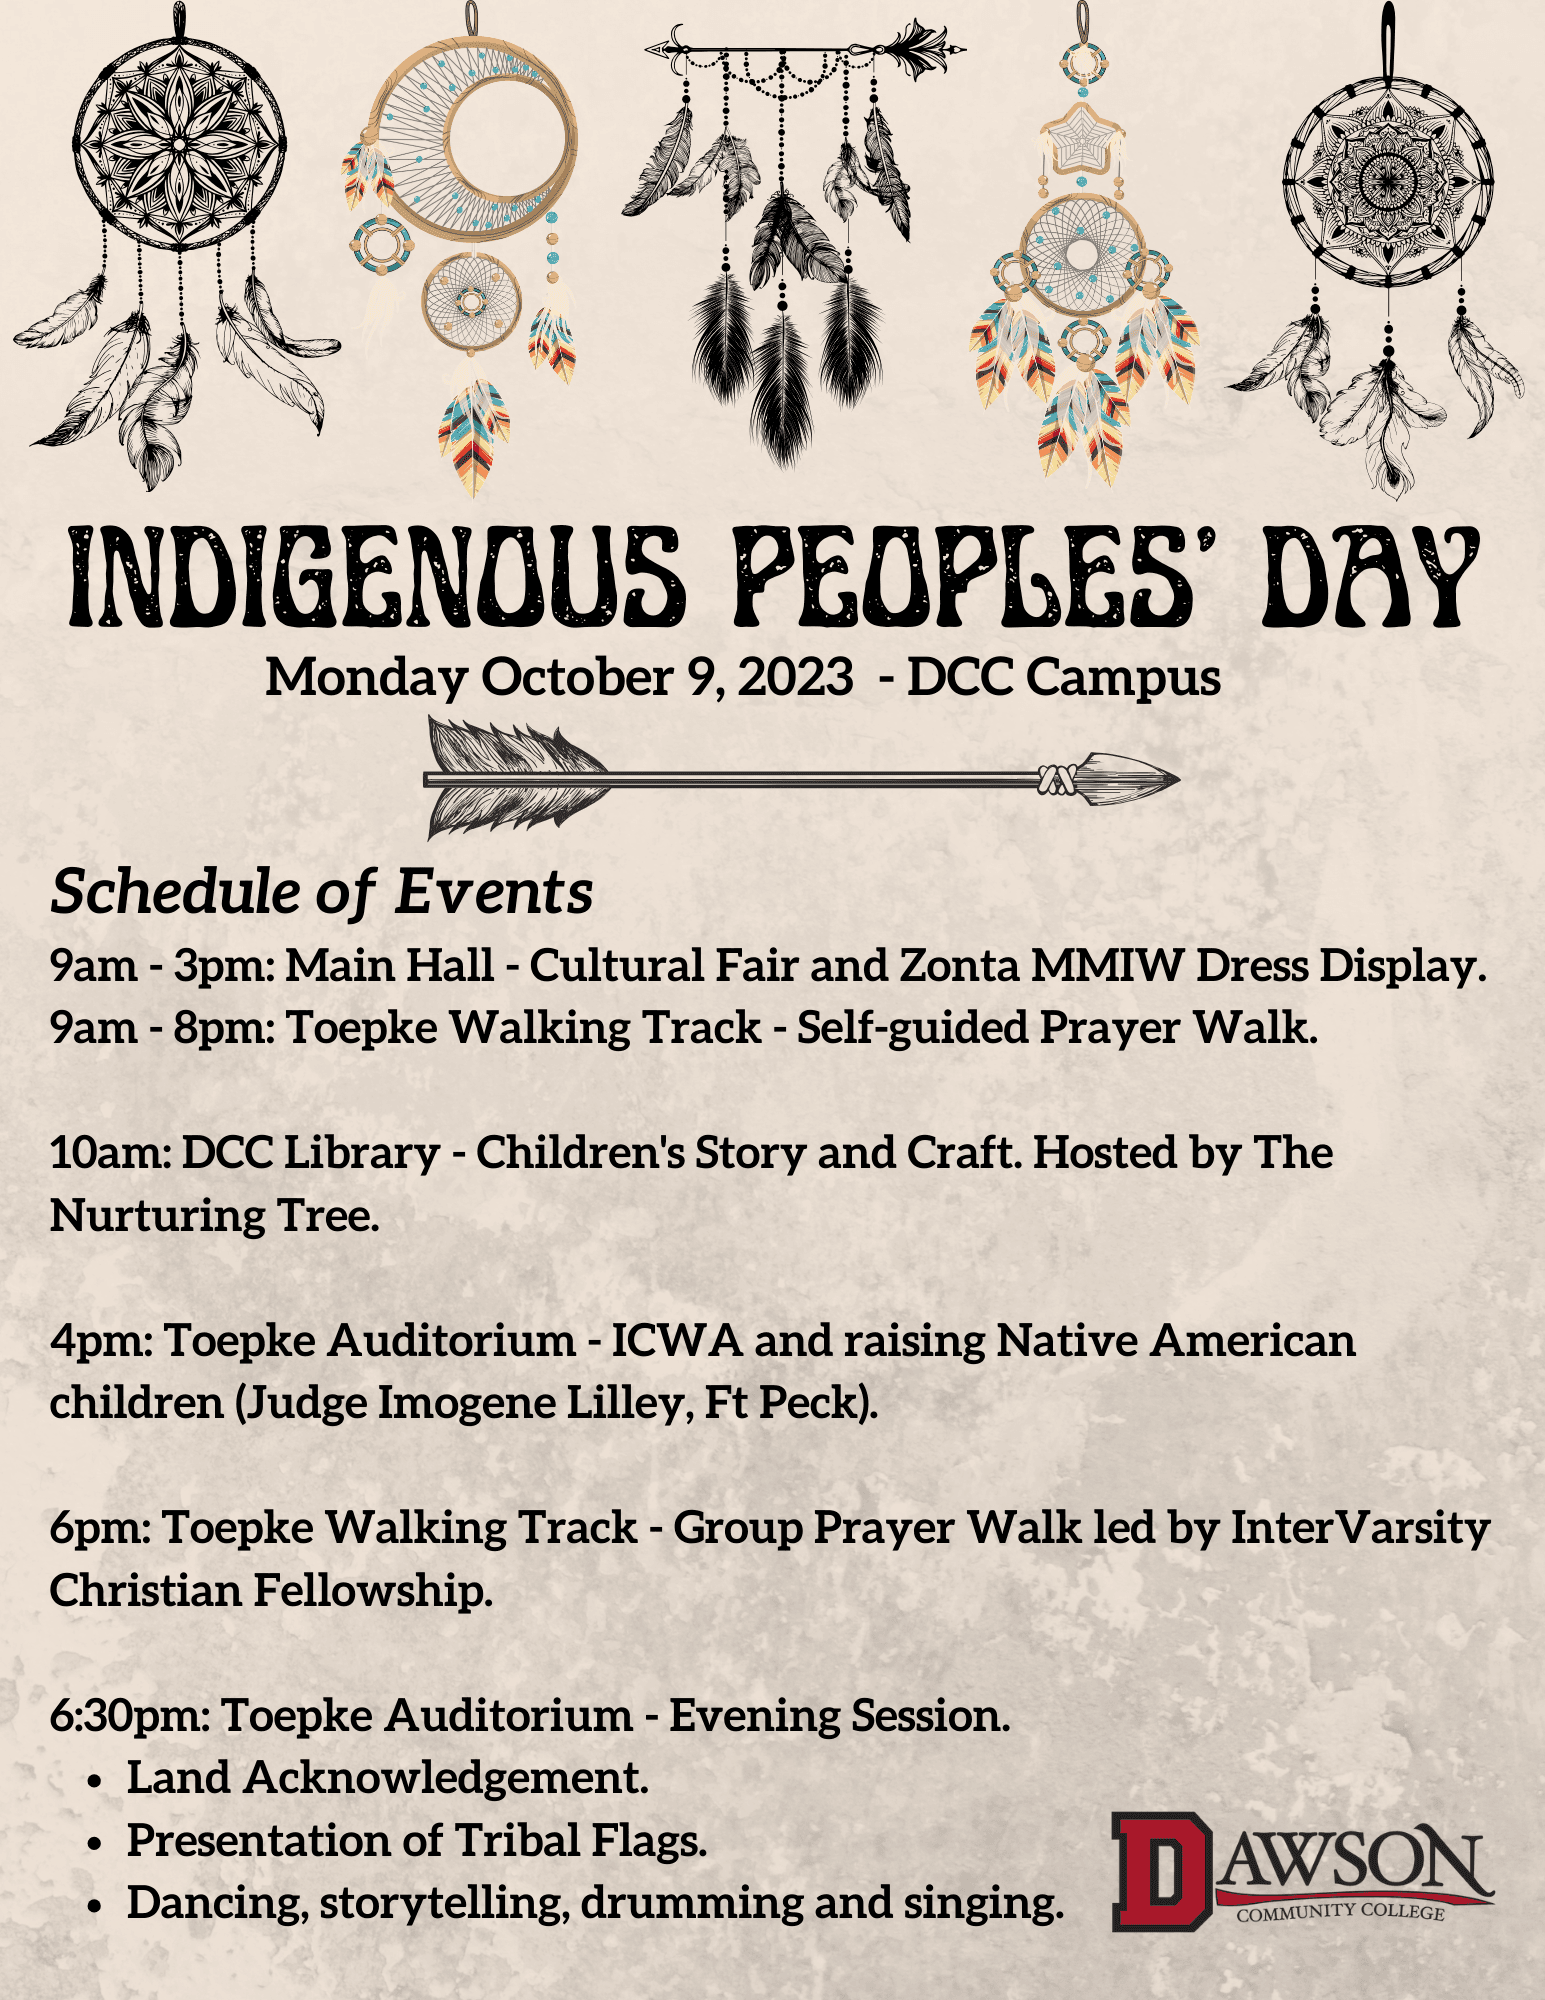 DCC is Celebrating Indigenous Peoples' Day on 10/9